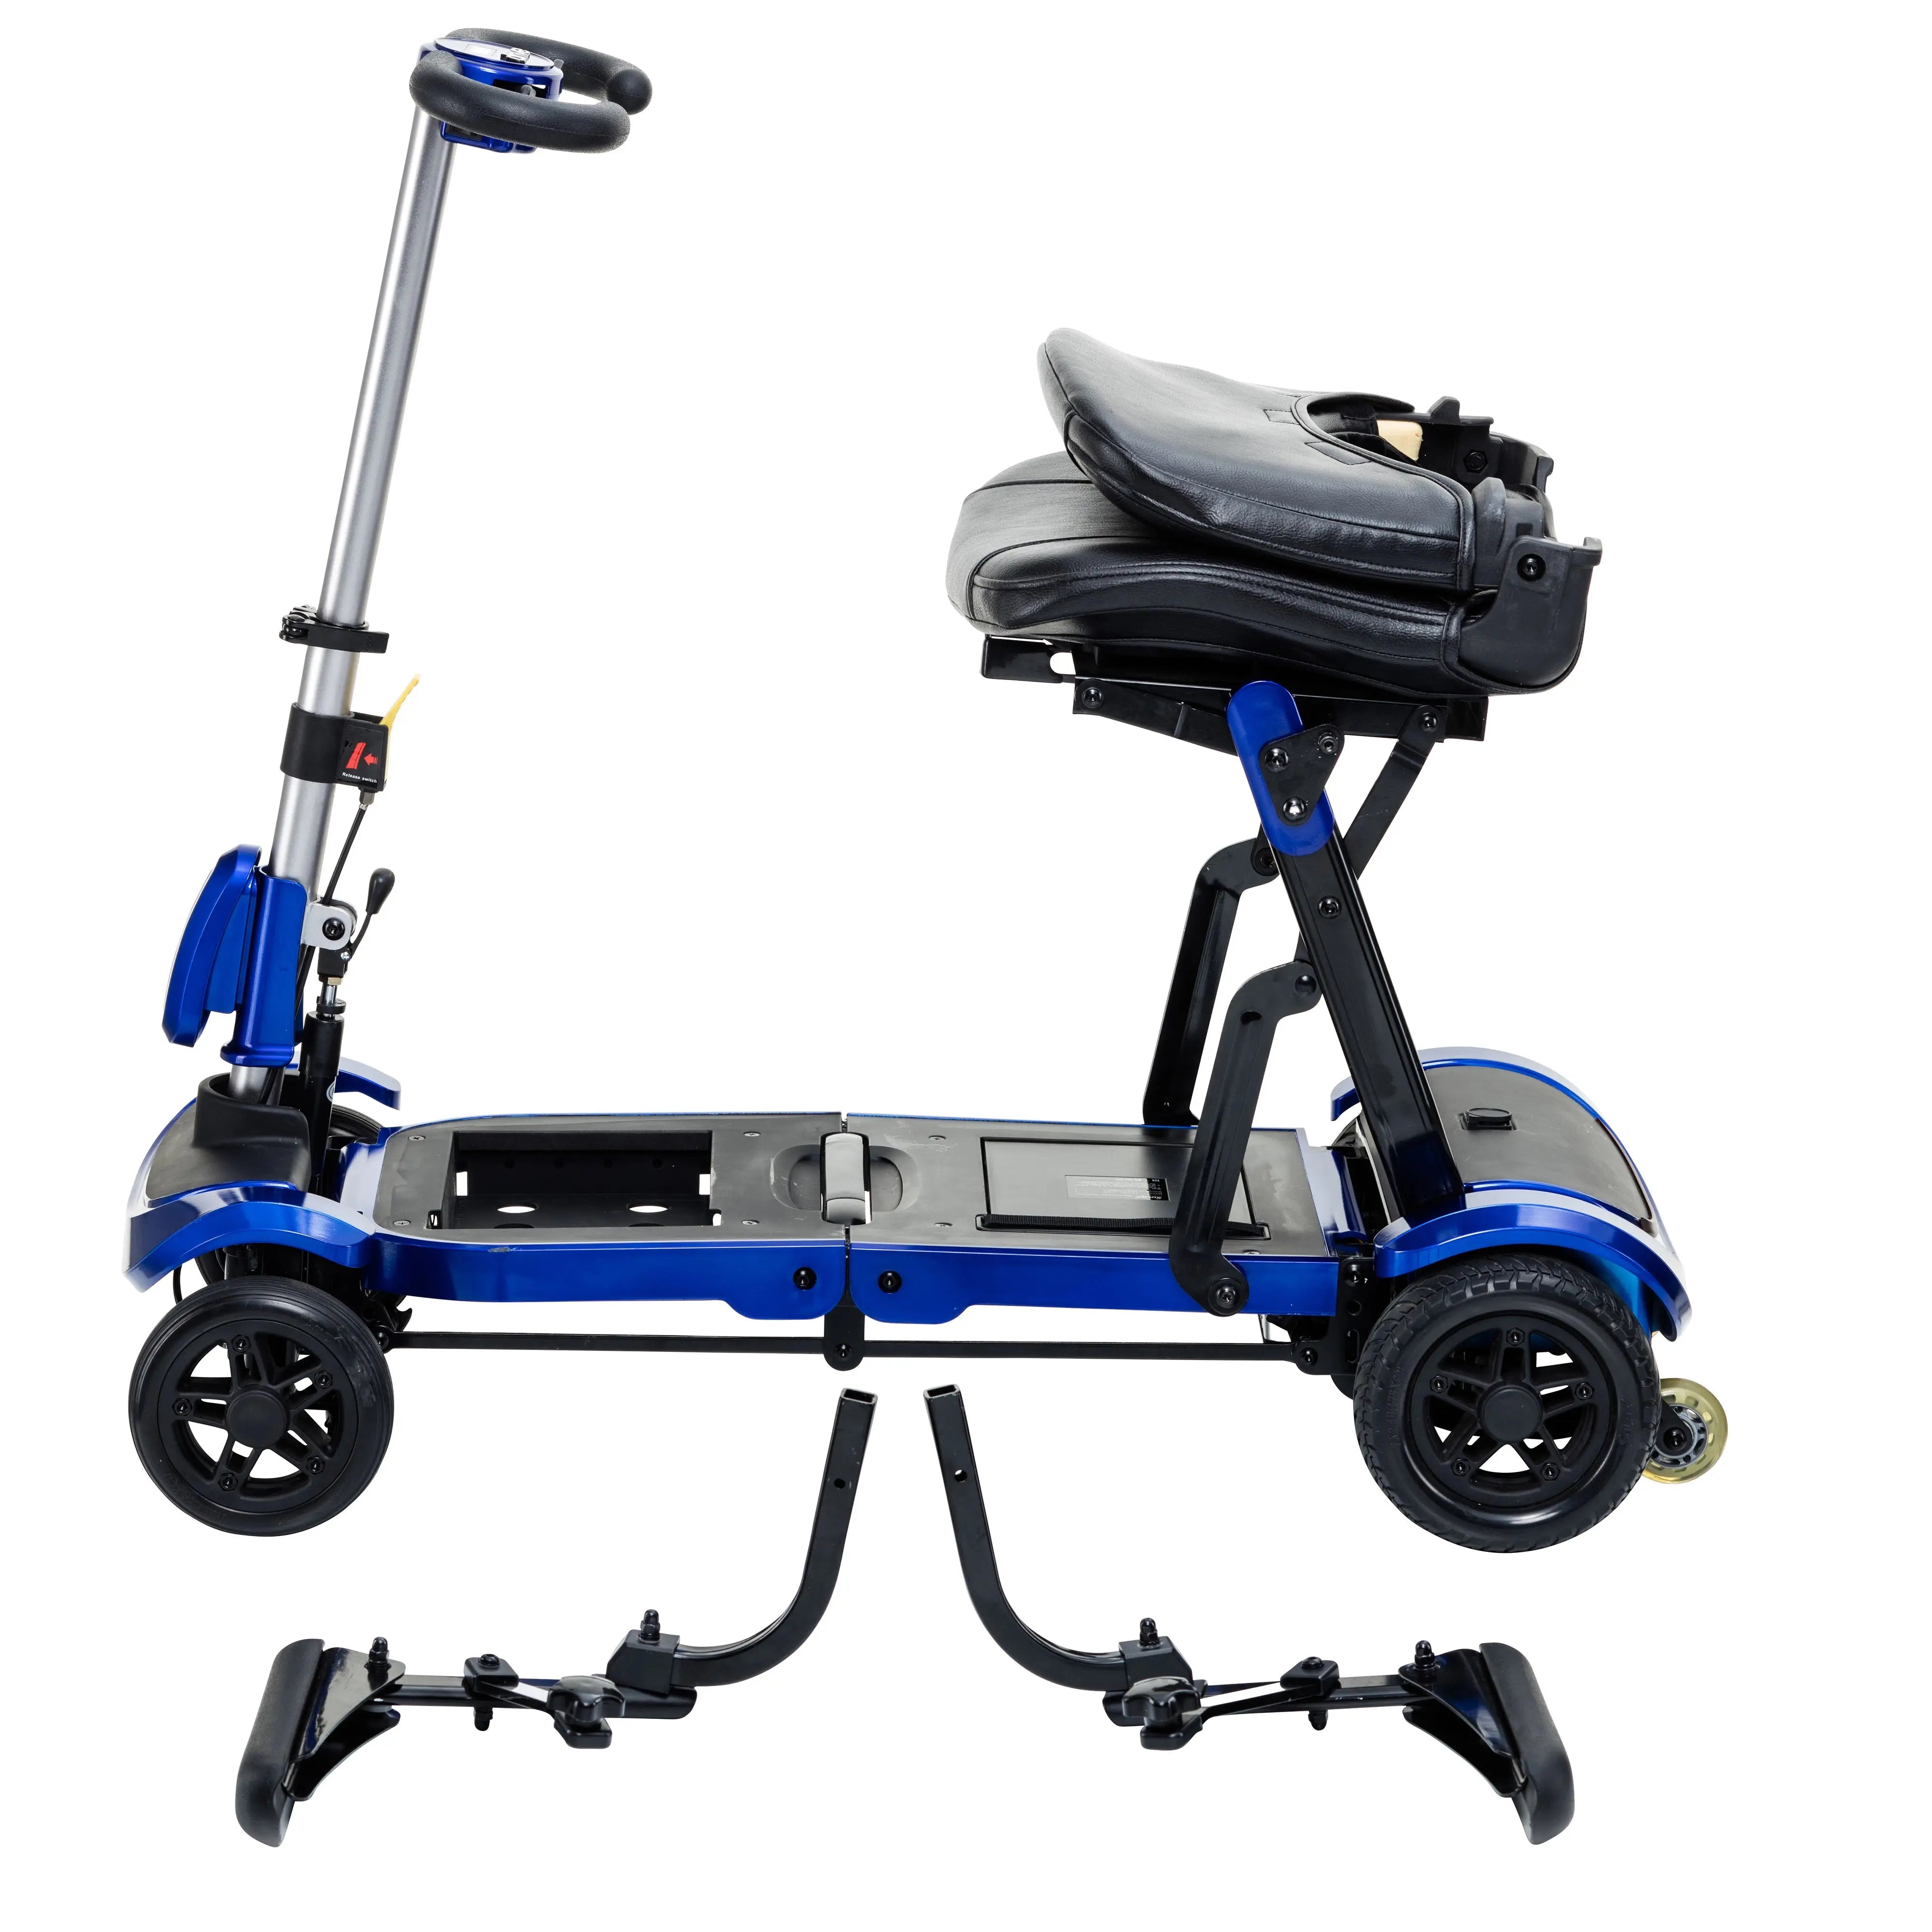 ZooMe Flex Ultra Compact Folding Travel 4 Wheel Scooter, Blue - Home Health Store Inc